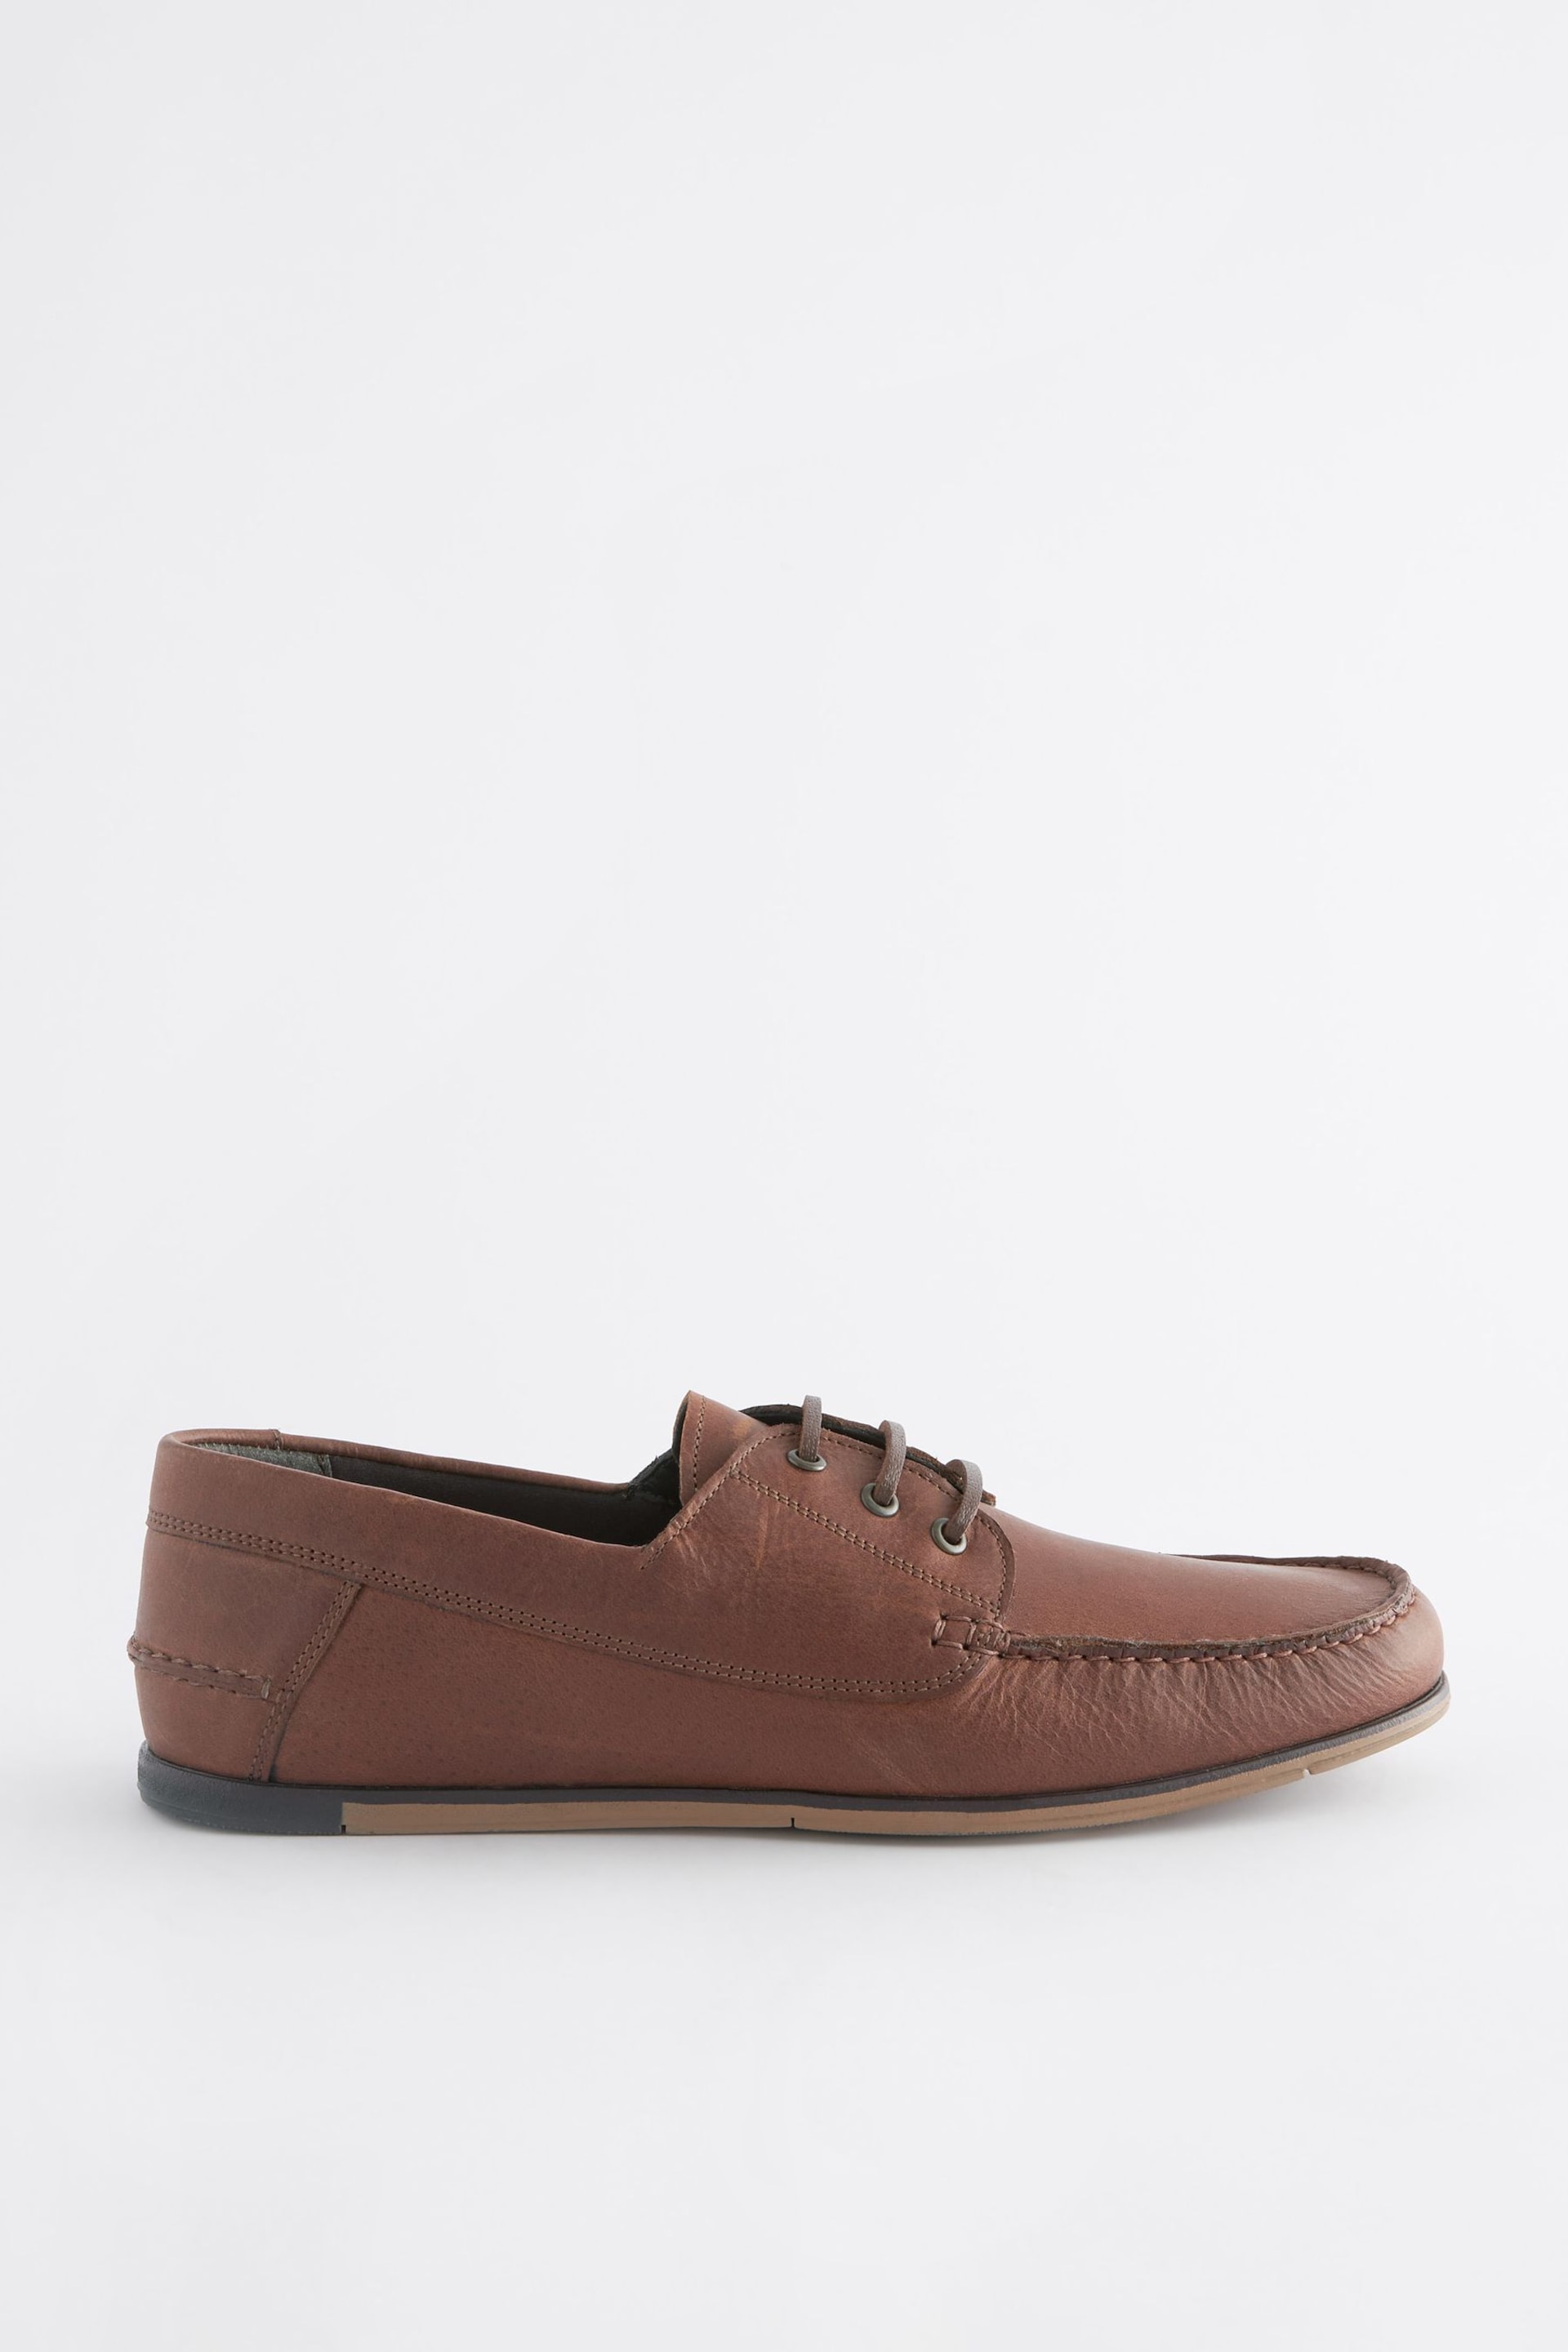 Tan Brown Formal Leather Boat Shoes - Image 3 of 7